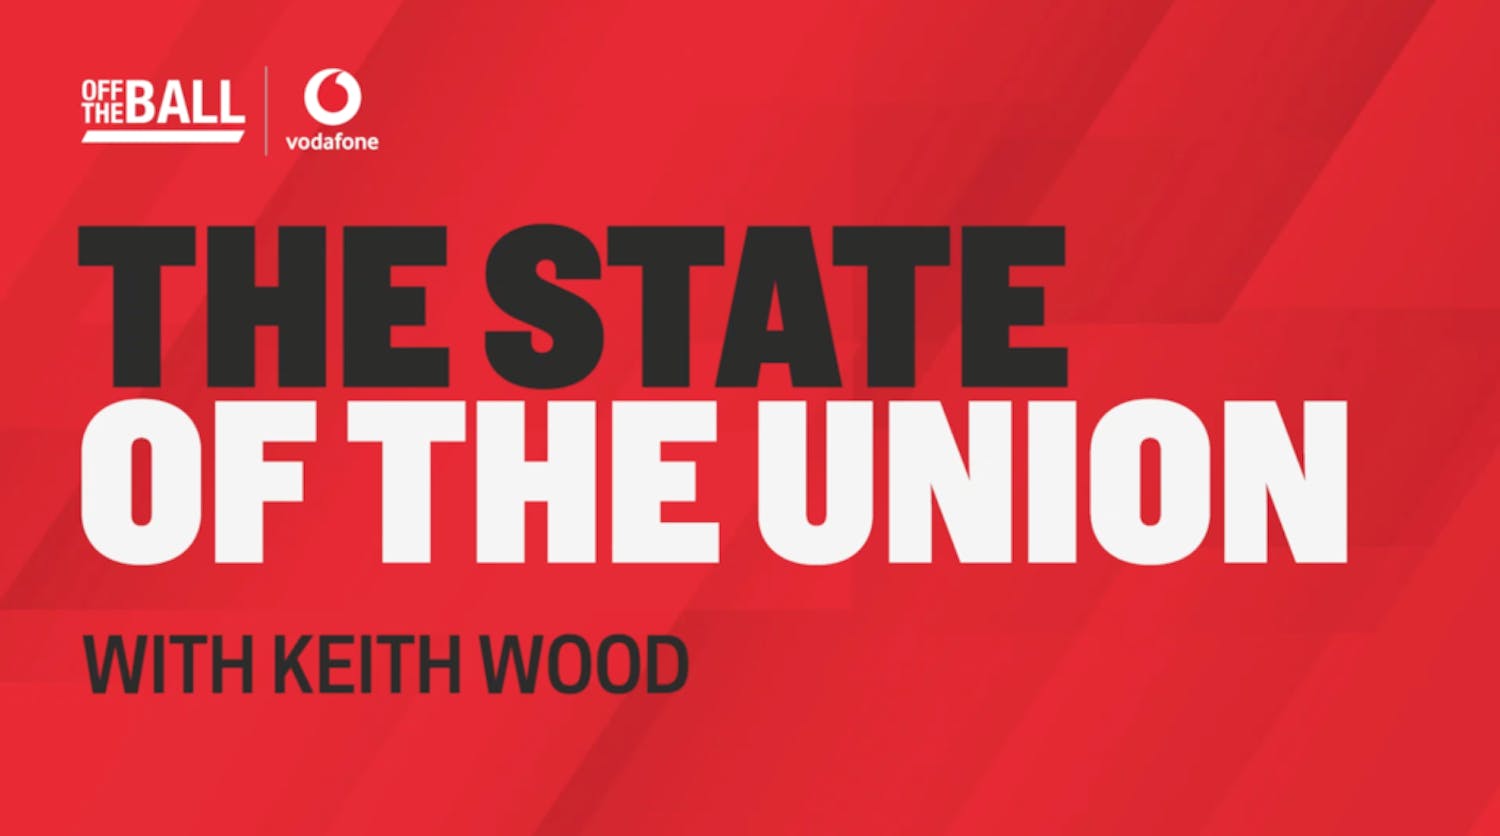 Michael Cheika & Andrew Mehrtens | Keith Wood's State of the Union | Big trouble Down Under